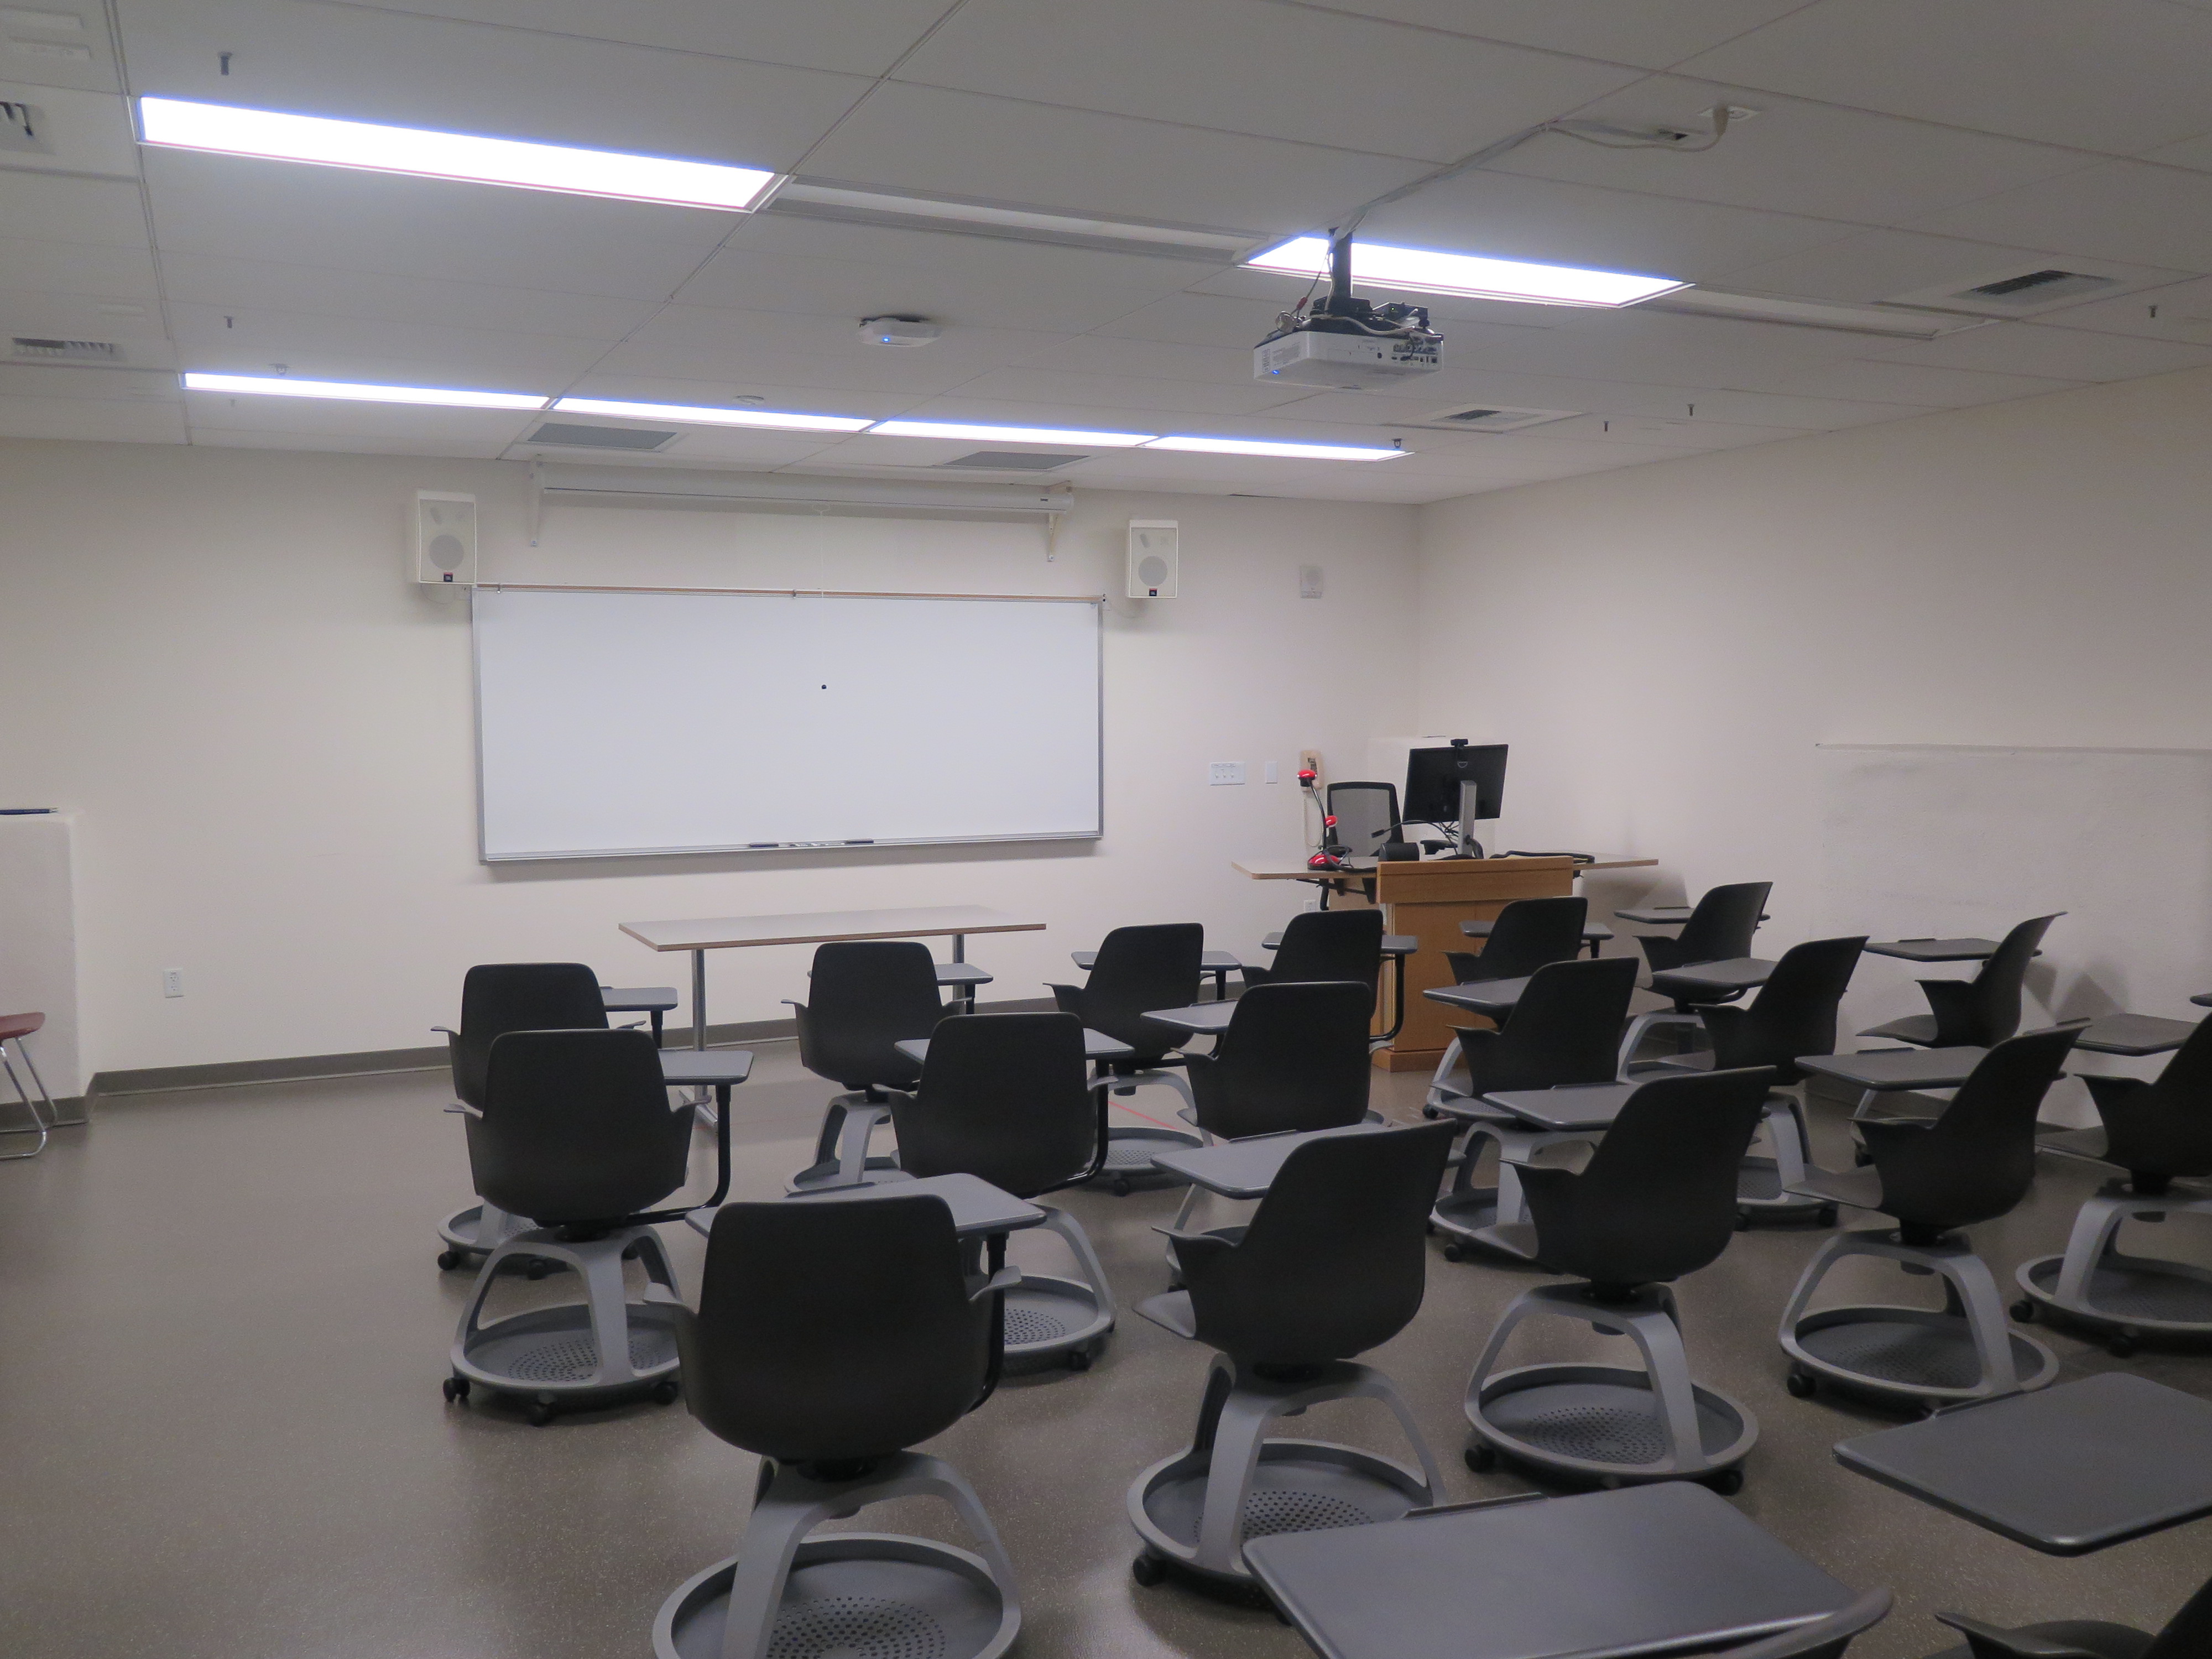 Room Consists of hard floors, moveable tablet armchairs, a white board and podium are both located at the front of the room.